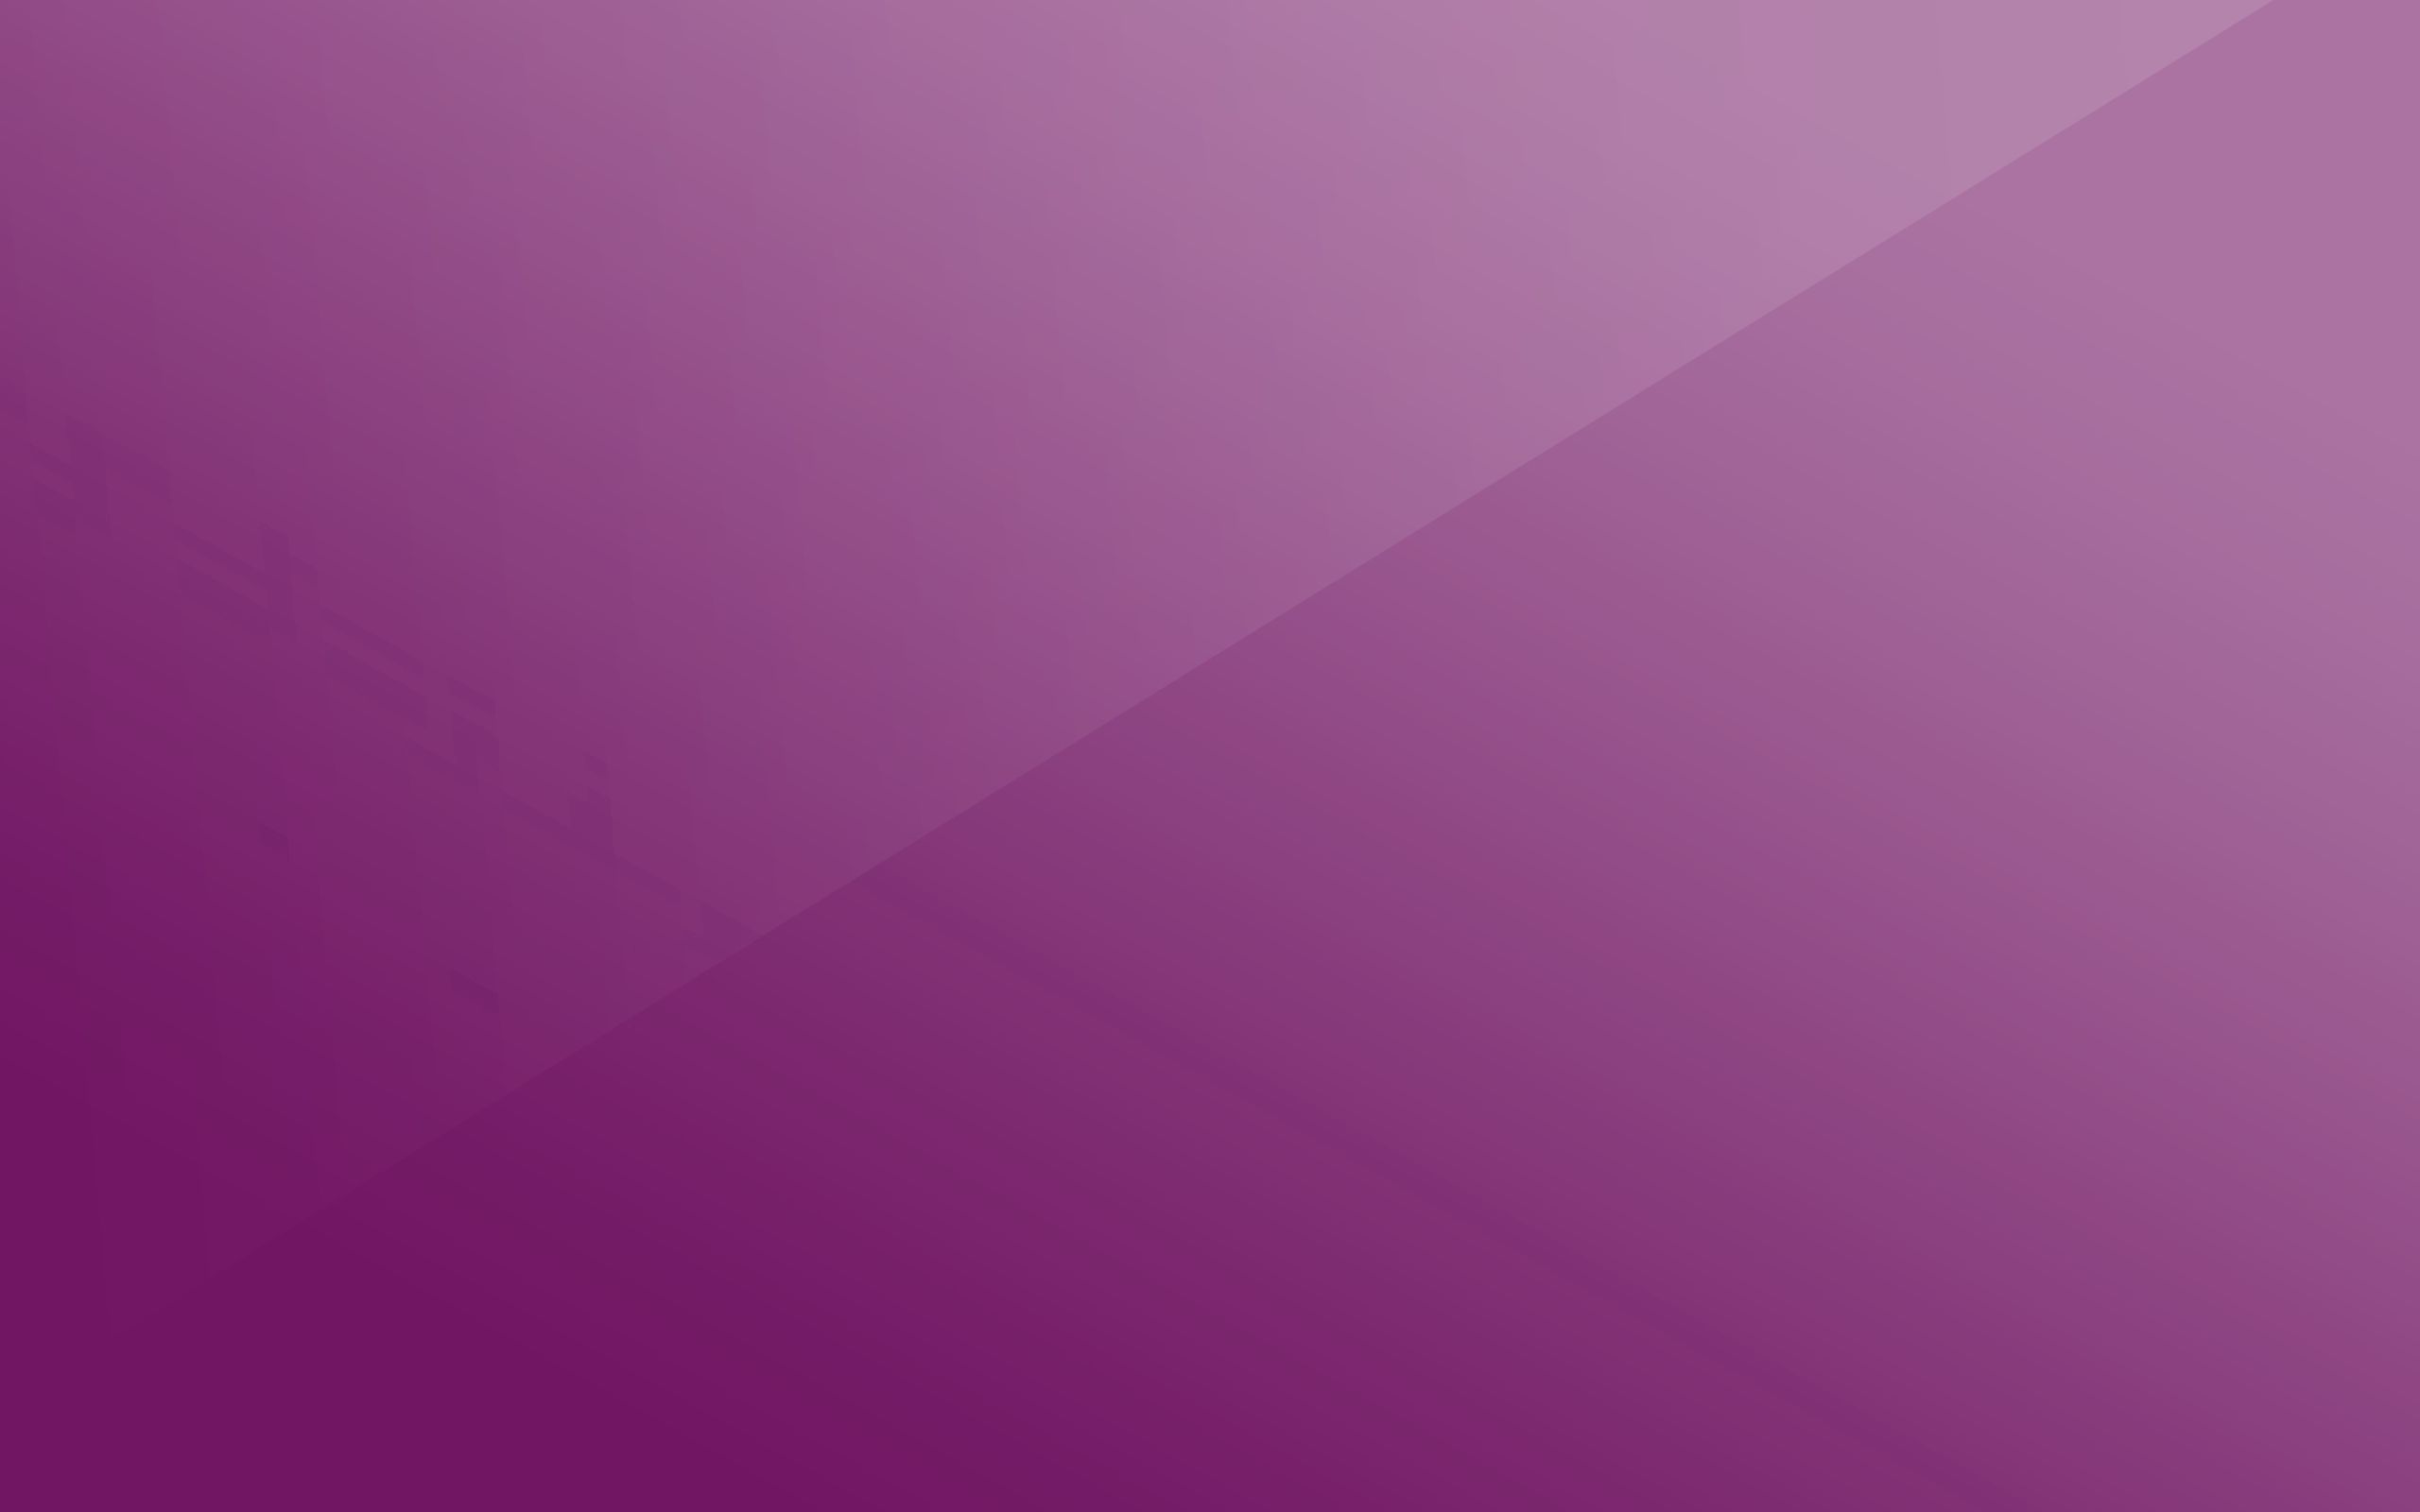 purple, abstract, light coloured, surface, background, violet, light, lines 8K